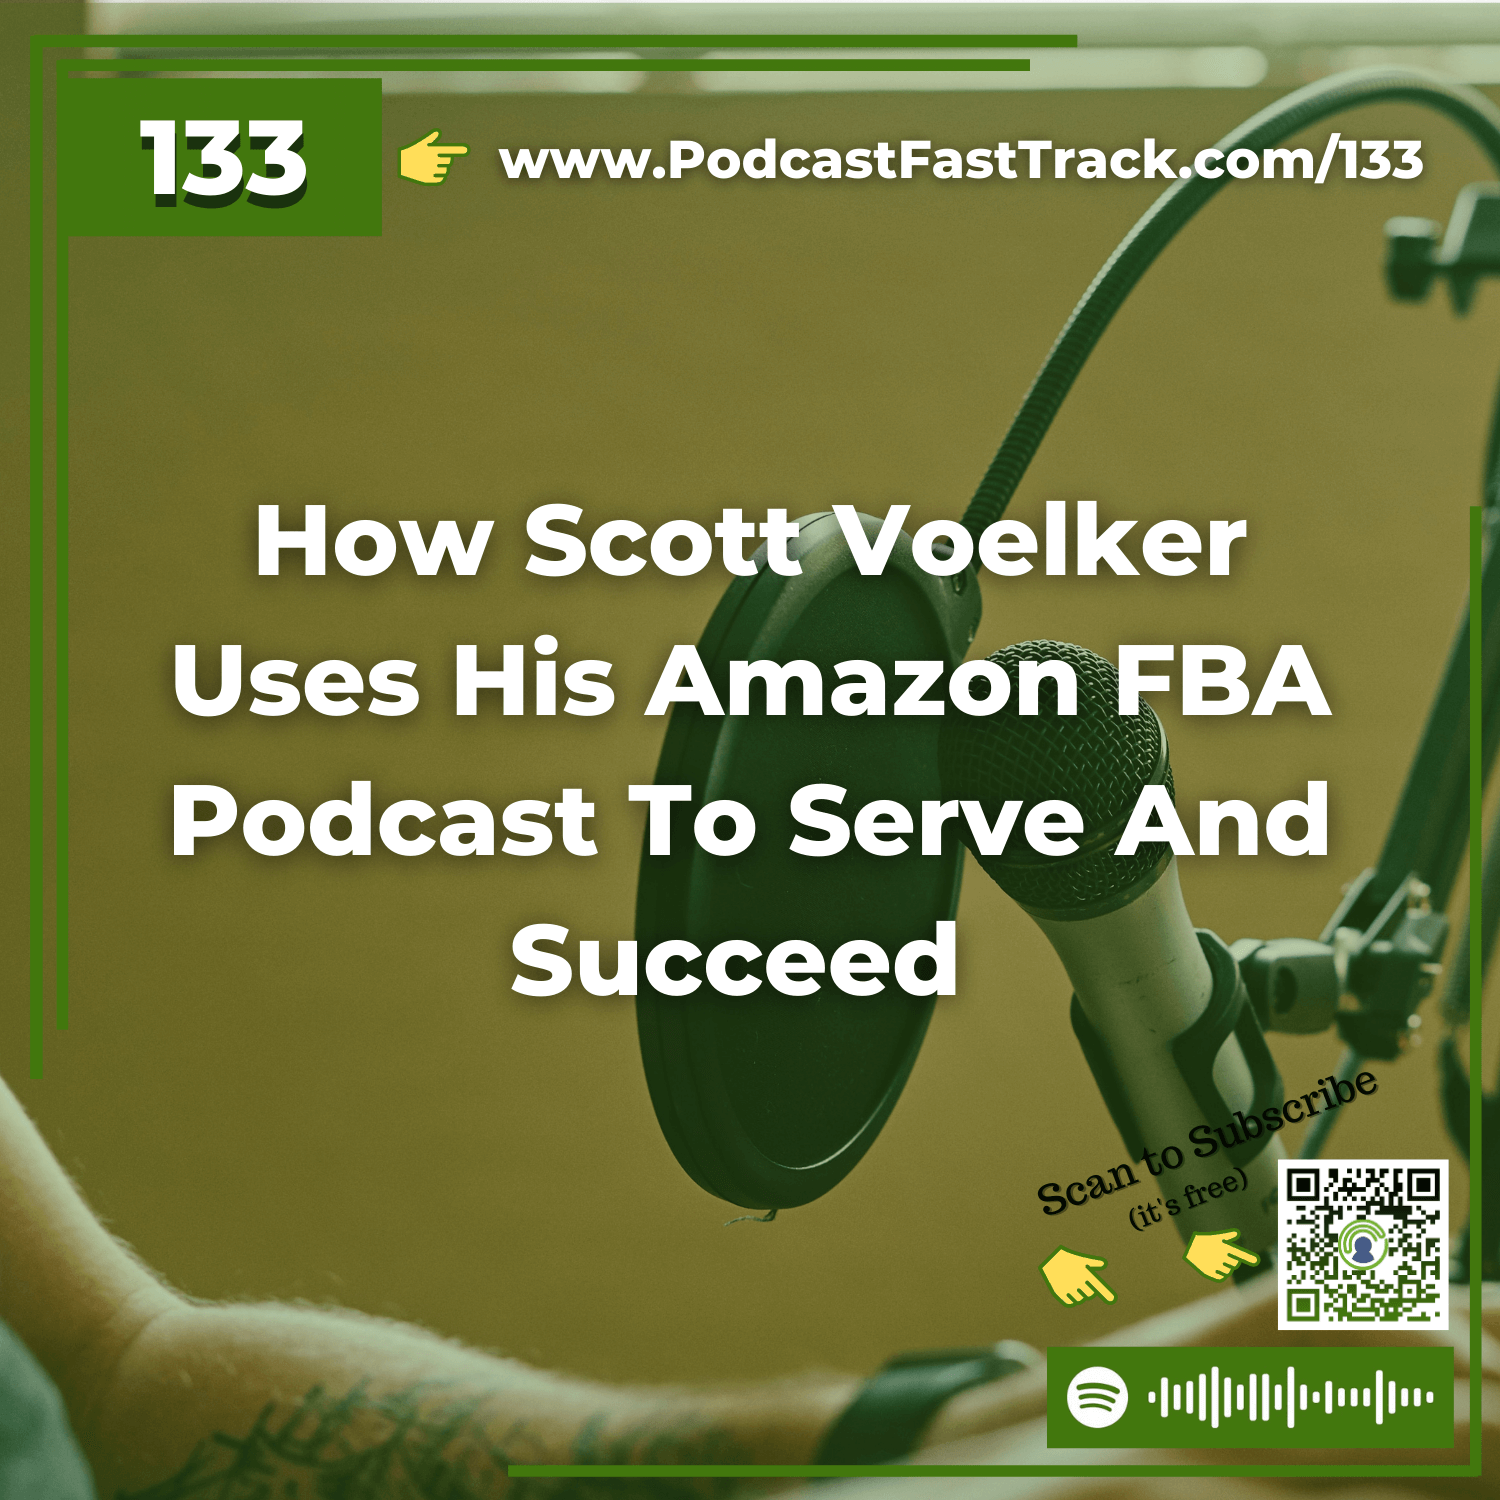 133: How Scott Voelker Uses His Amazon FBA Podcast To Serve And Succeed